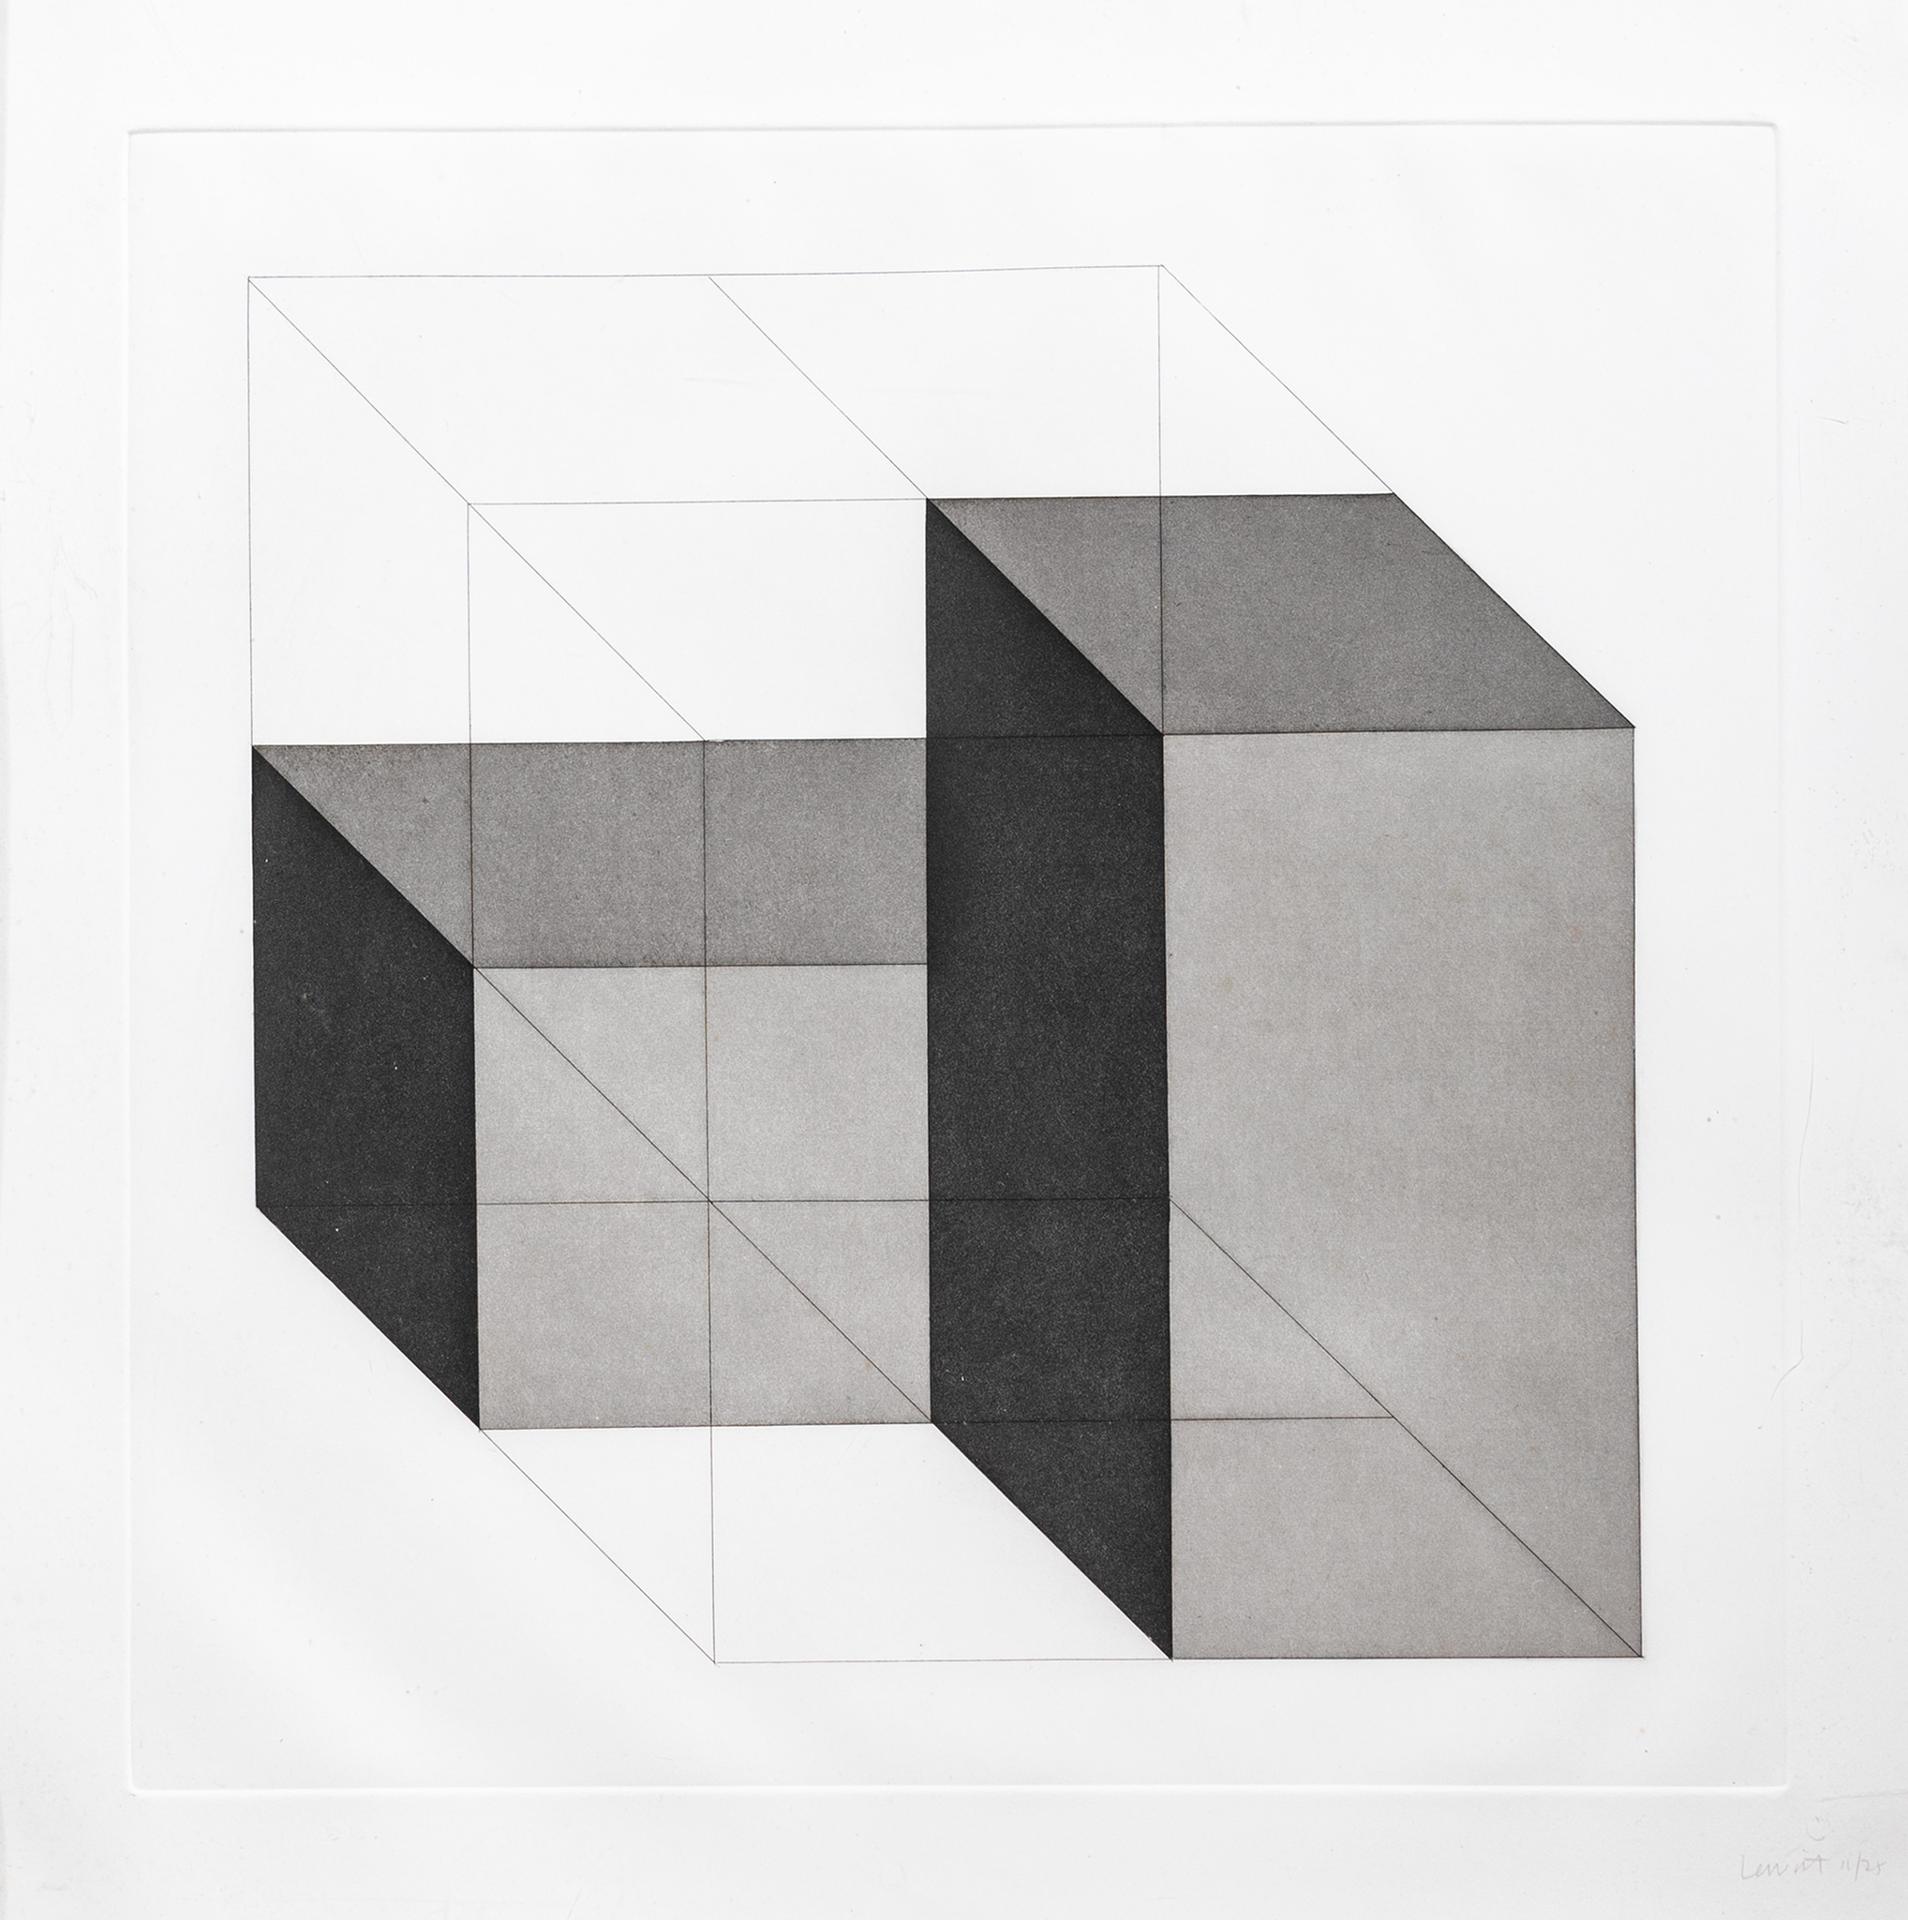 Sol Lewitt (1928-2007) - Forms Derived from a Cube, Plate No. 24, 1982